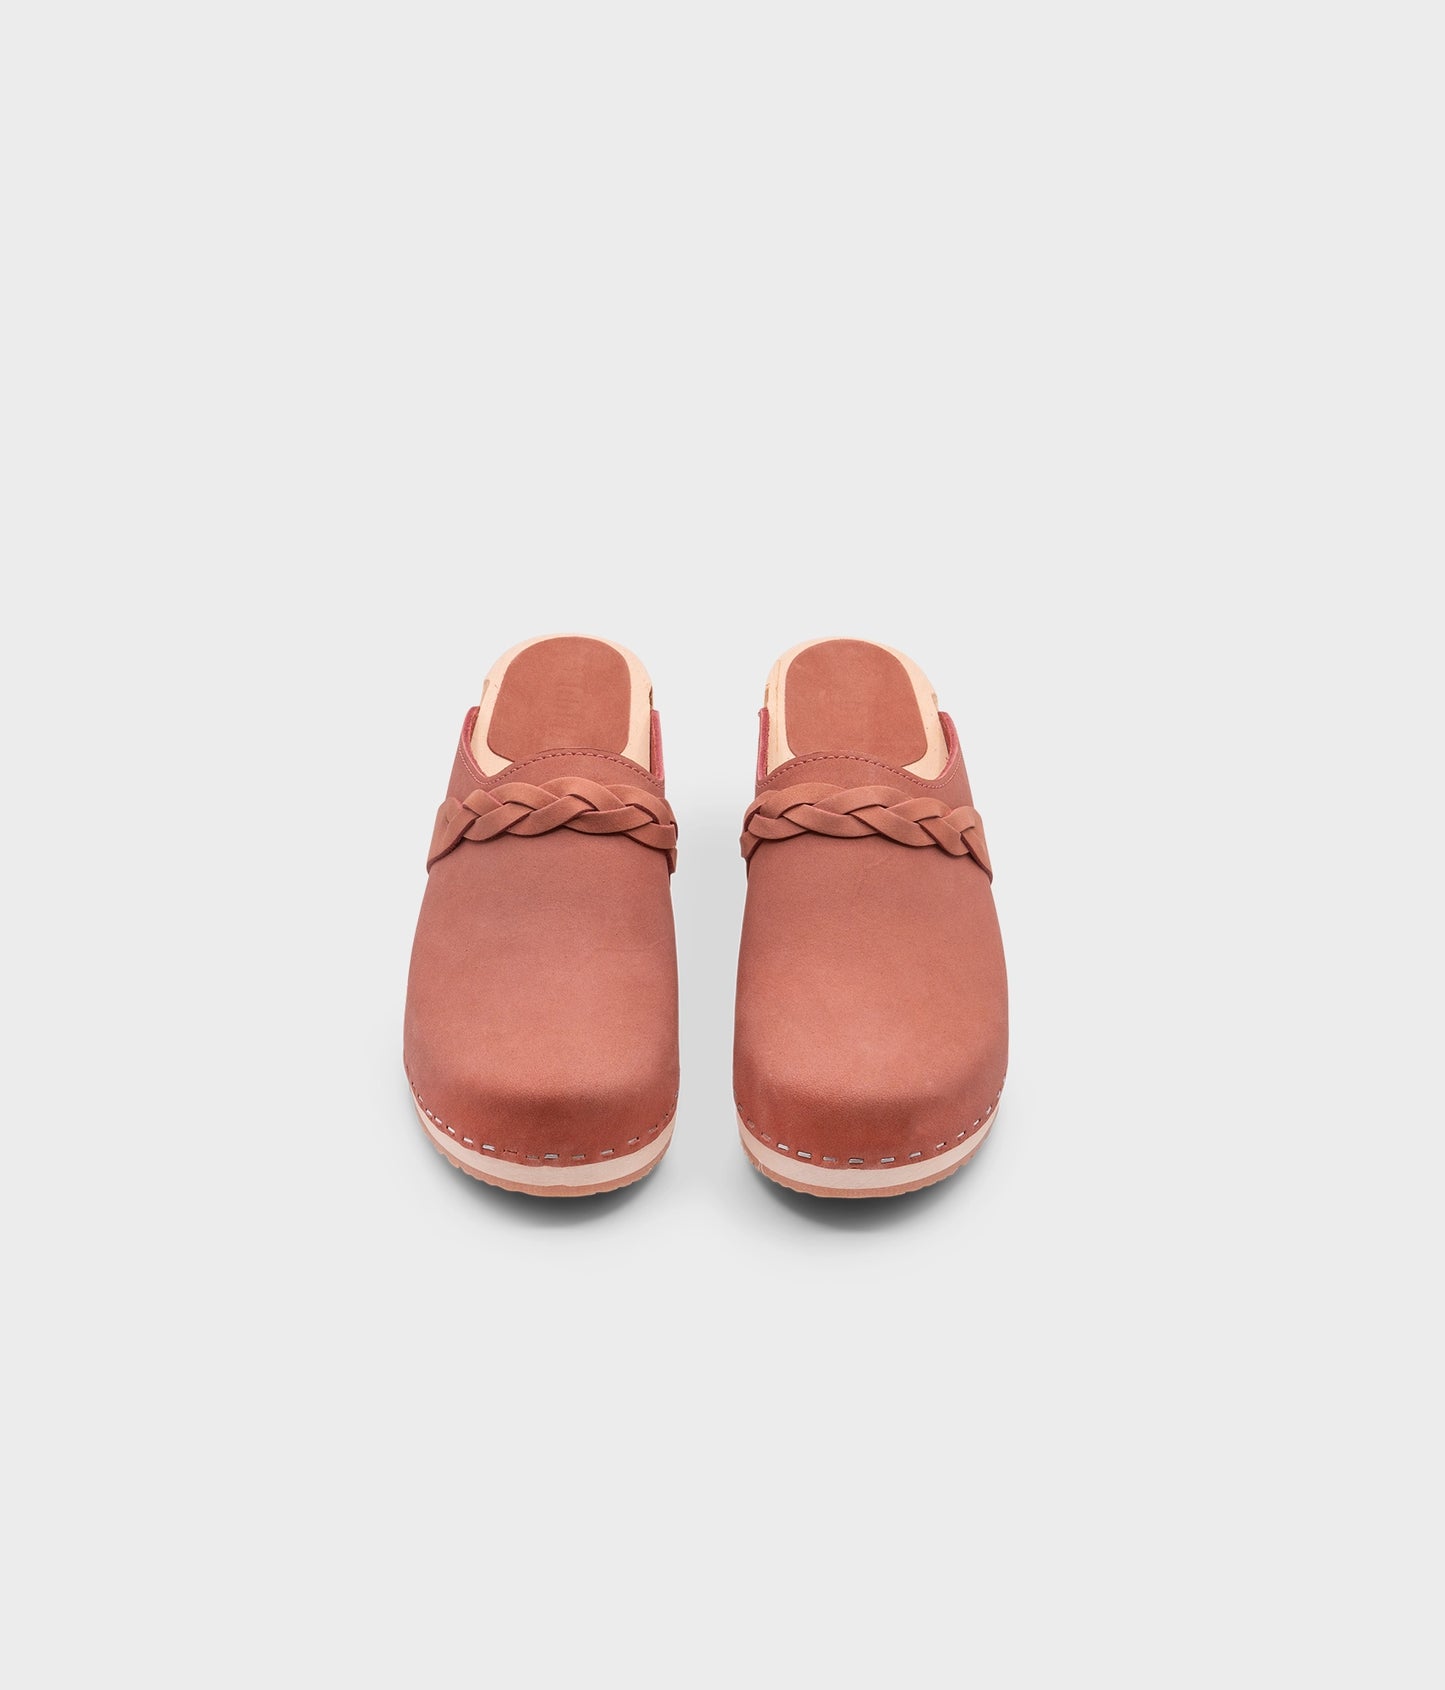 low heeled clog mules in blush pink nubuck leather with a braided strap stapled on a light wooden base